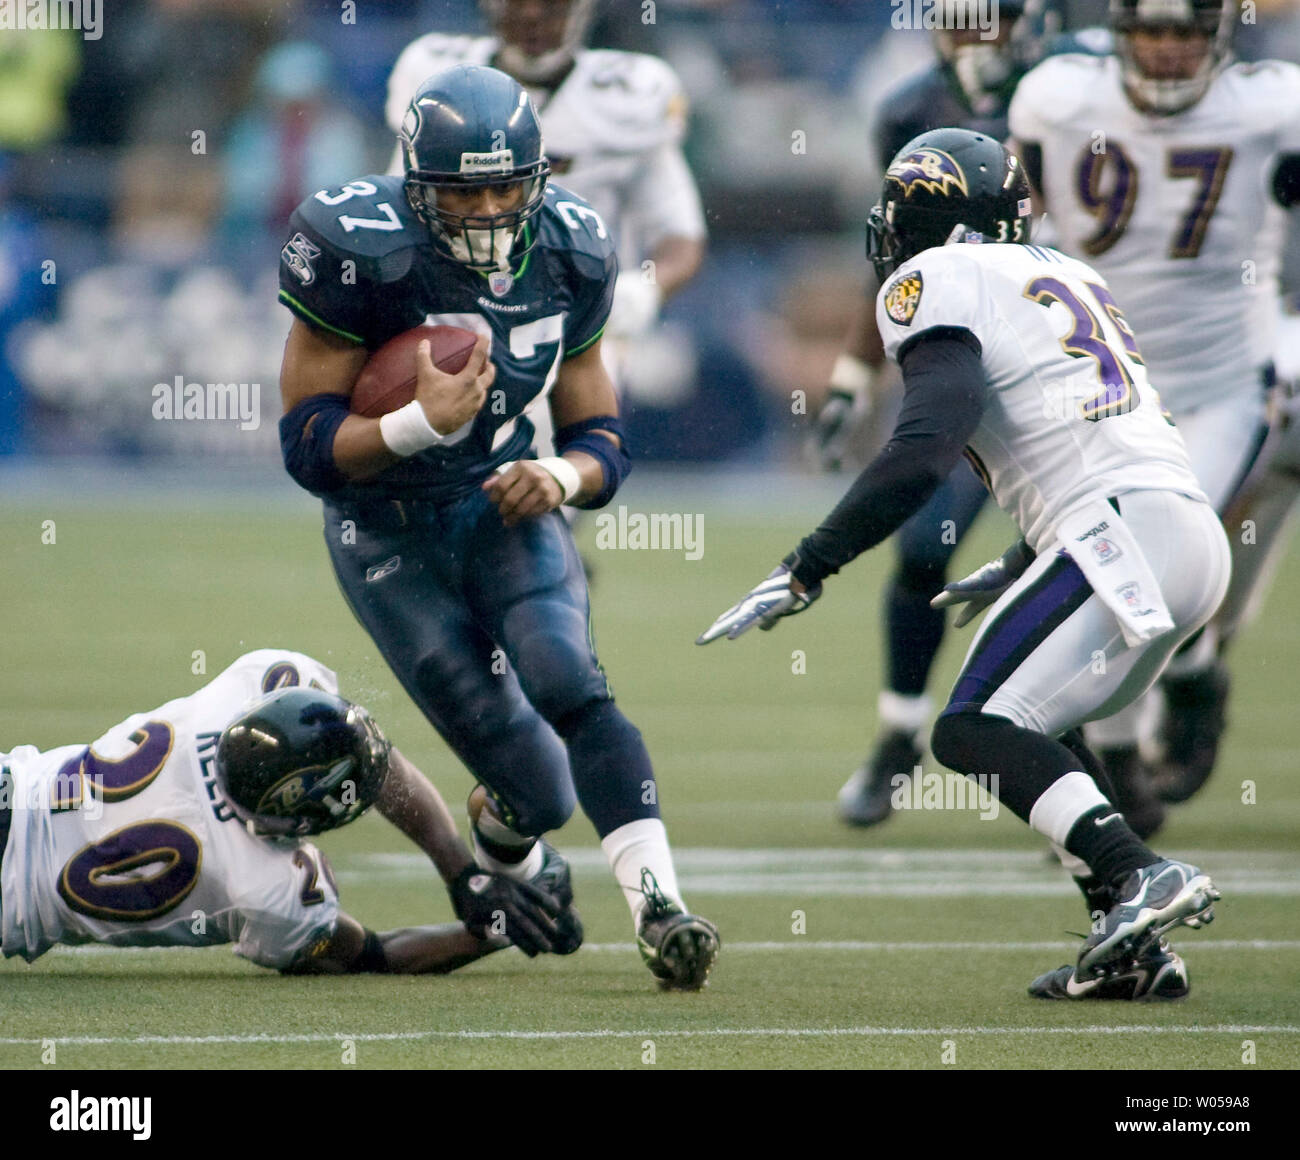 Seattle Seahawks' running back Shaun Alexander (C) runs through the attempted tackles of Baltimore Ravens' free safety Ed Reed (L) and cornerback Corey Ivy (R) enroute to scoring on a 14-yard screen pass from Matt Hasselbeck in the first half at Qwest Field in Seattle on December 23, 2007. Alexander turned a season of being booed at home into holiday cheers by gaining 73 yards on 13 carries and scoring his 100th career touchdown in the Seahawks 27-6 win over the Ravens. (UPI Photo/Jim Bryant). Stock Photo